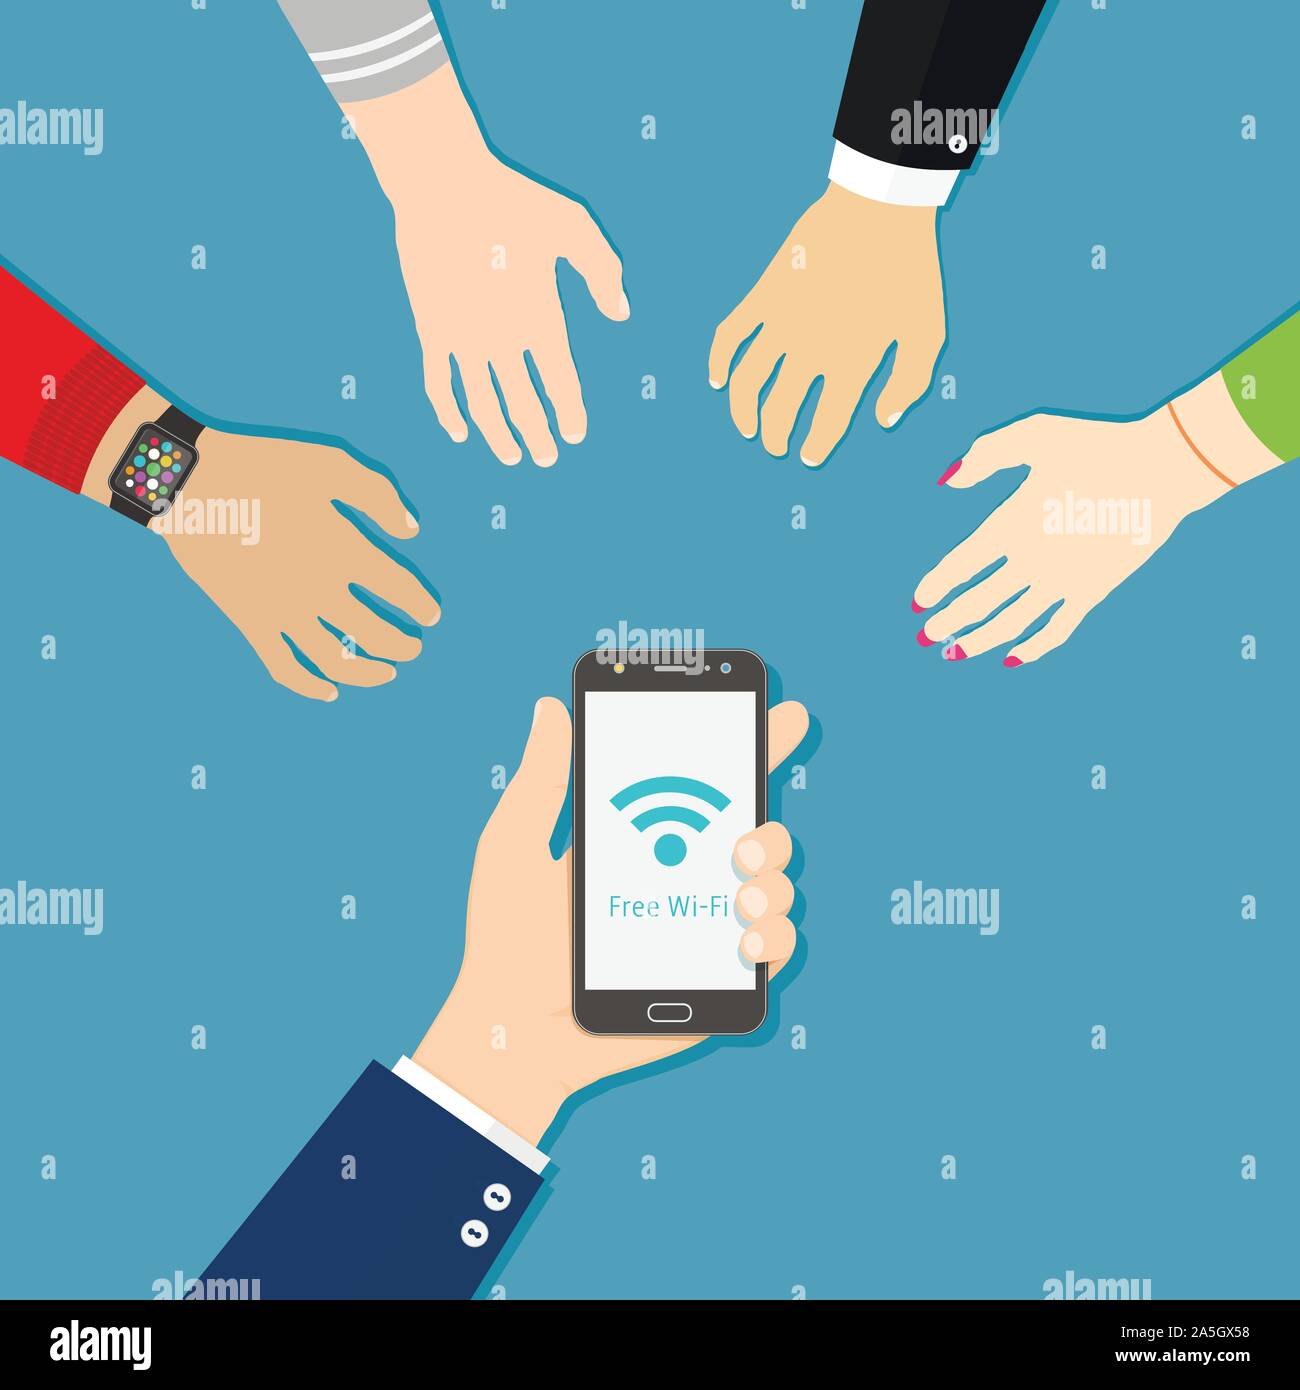 Hand holding black smartphone with Wi-Fi icon. People hands are reaching for free wi-fi. Flat style illustration. Stock Vector